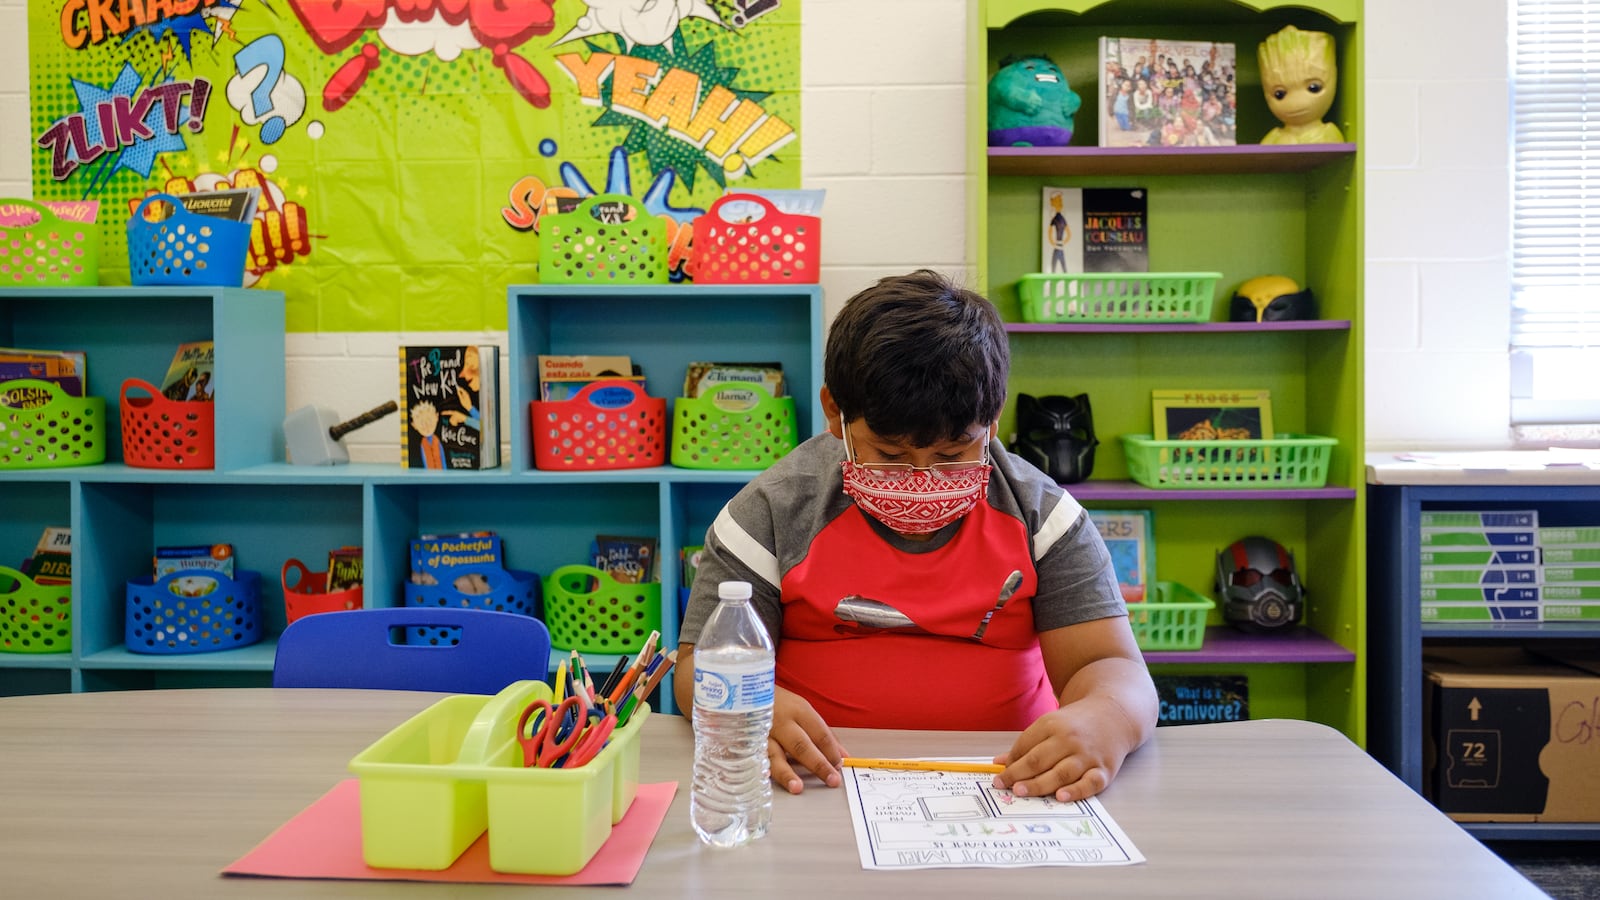 A student completes an introductory worksheet about himself for the first day of school. There are several colorful signs and bins on the wall behind him.